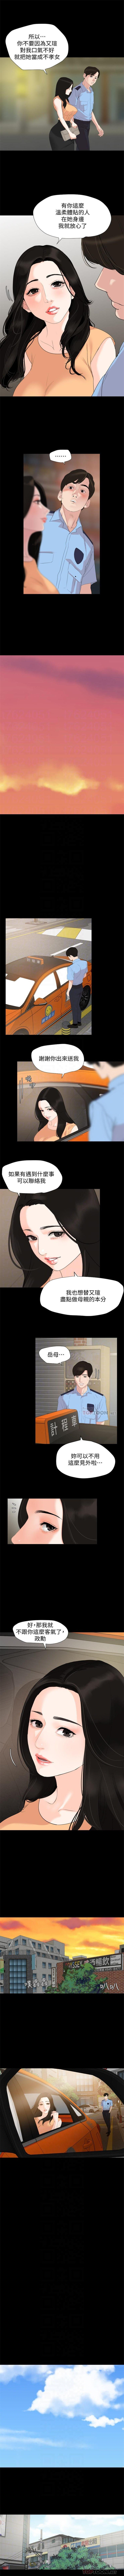 Swallowing 與岳母同屋 1-17 官方中文（連載中） Calle - Page 11